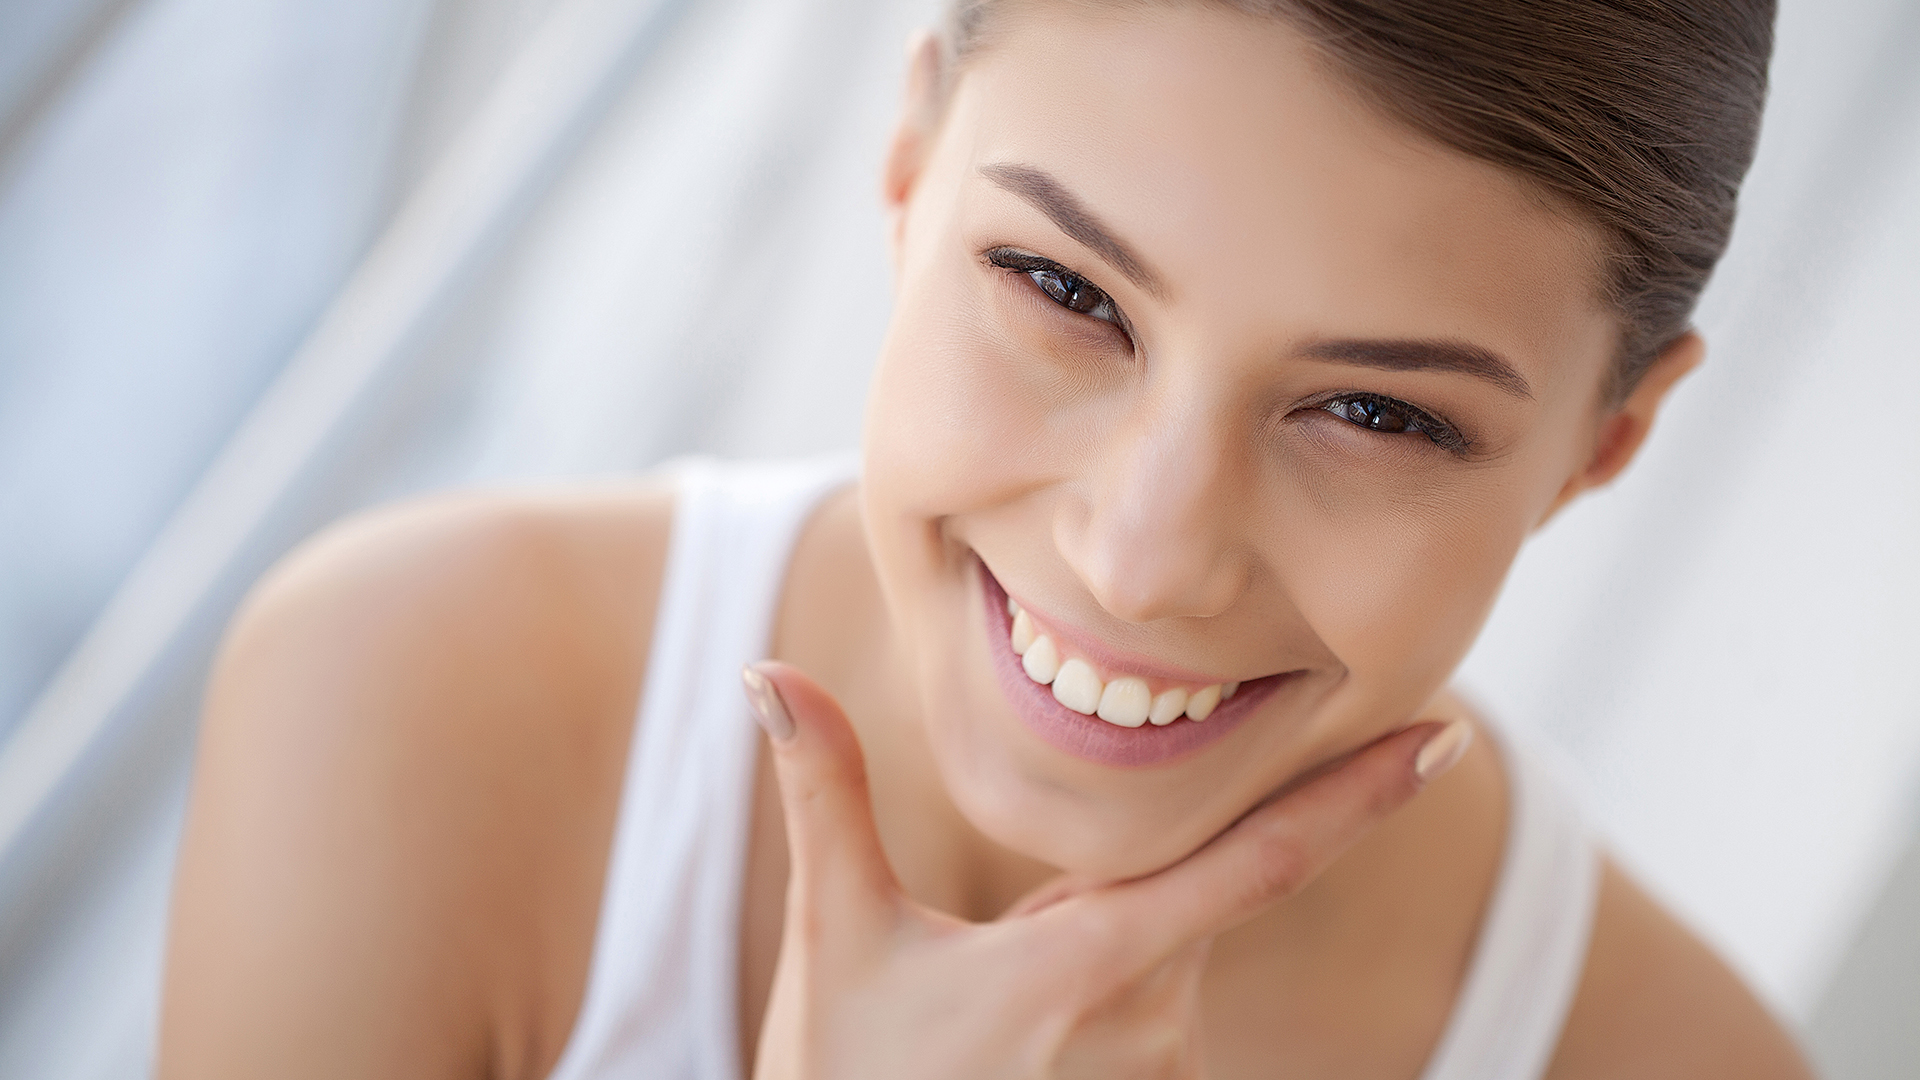 Portrait Beautiful Happy Woman With White Teeth Smiling. Beauty. High Resolution Image.